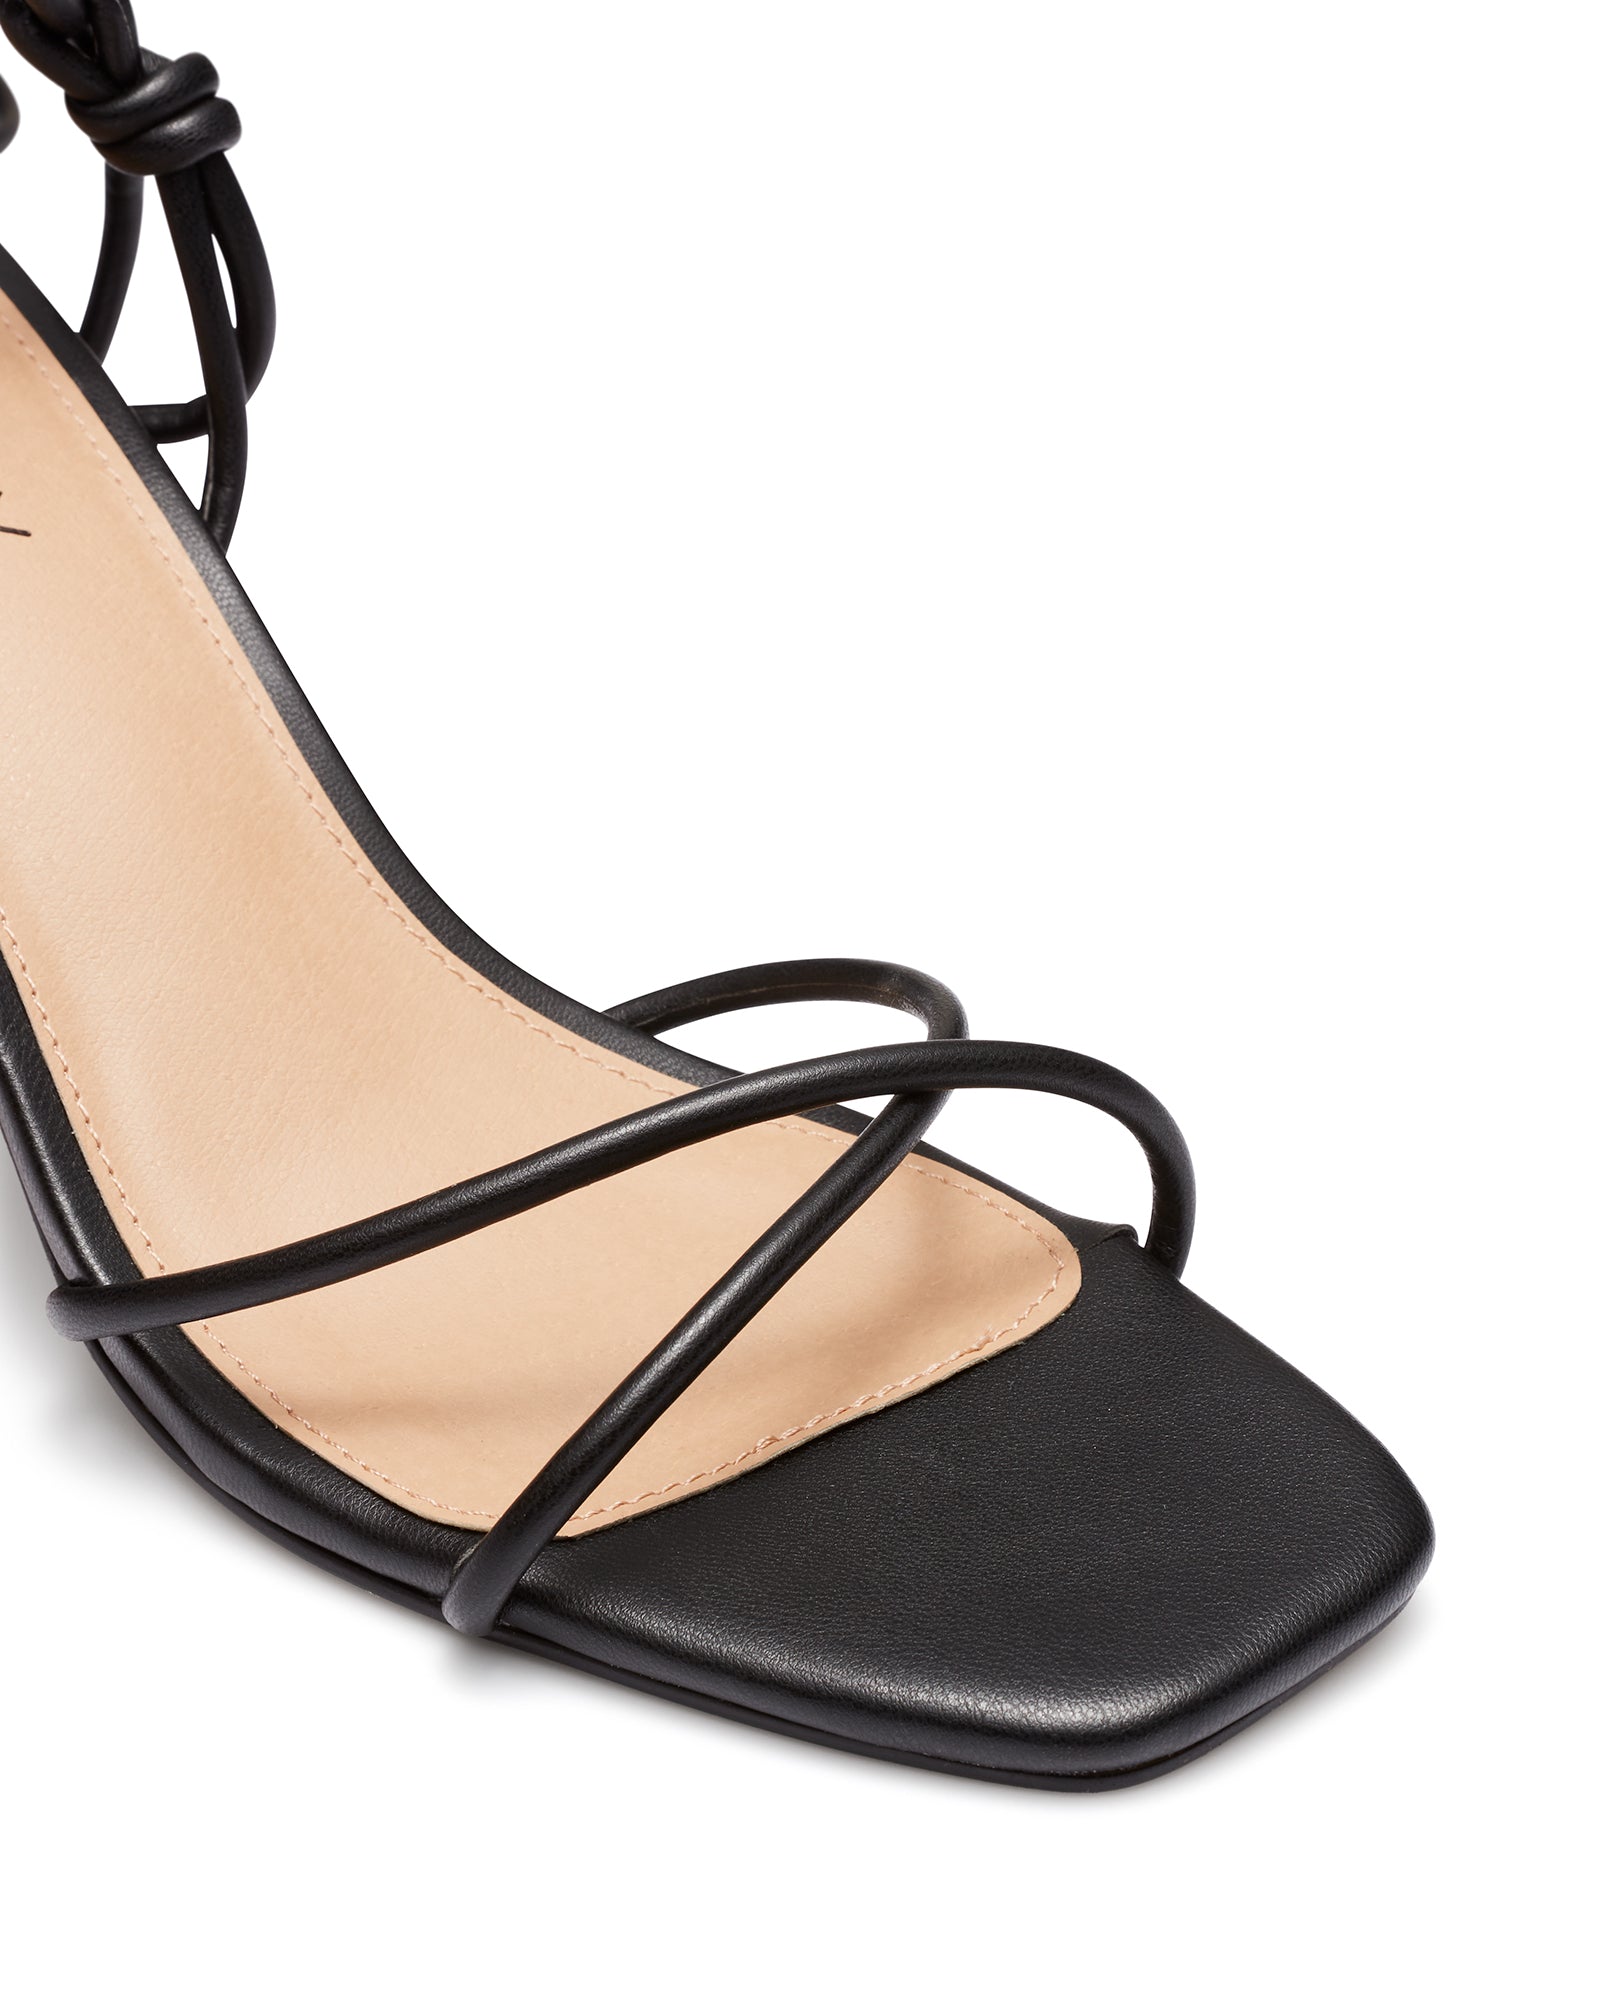 Therapy Shoes Karma Black | Women's Heels | Sandals | Tie Up | Dress